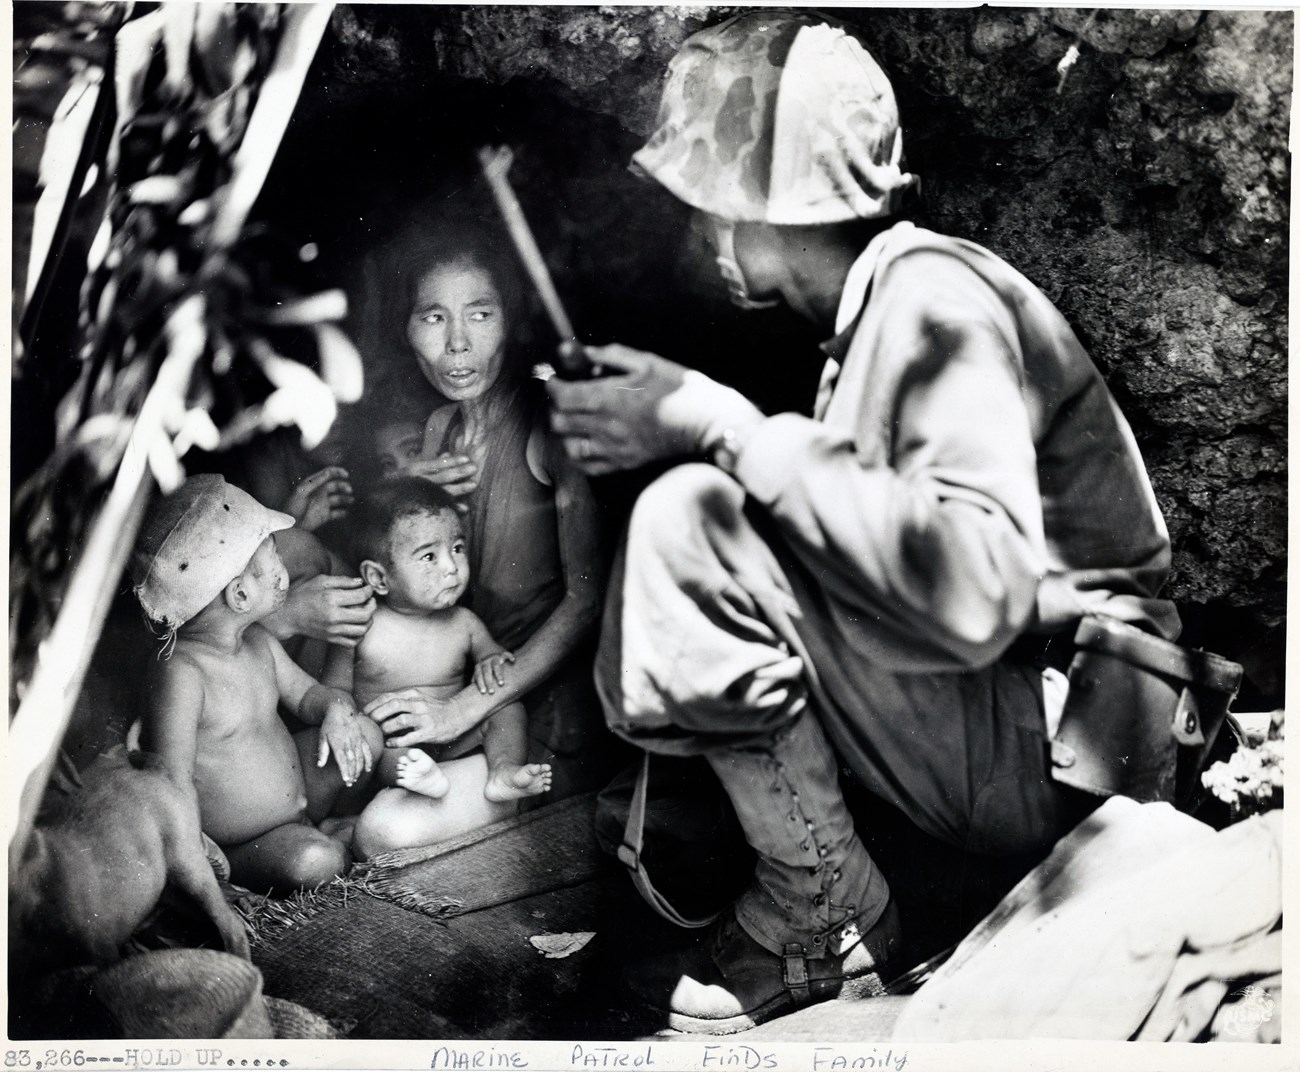 Uniformed Marine kneels at mouth of cave with emaciated woman surrounded by six children